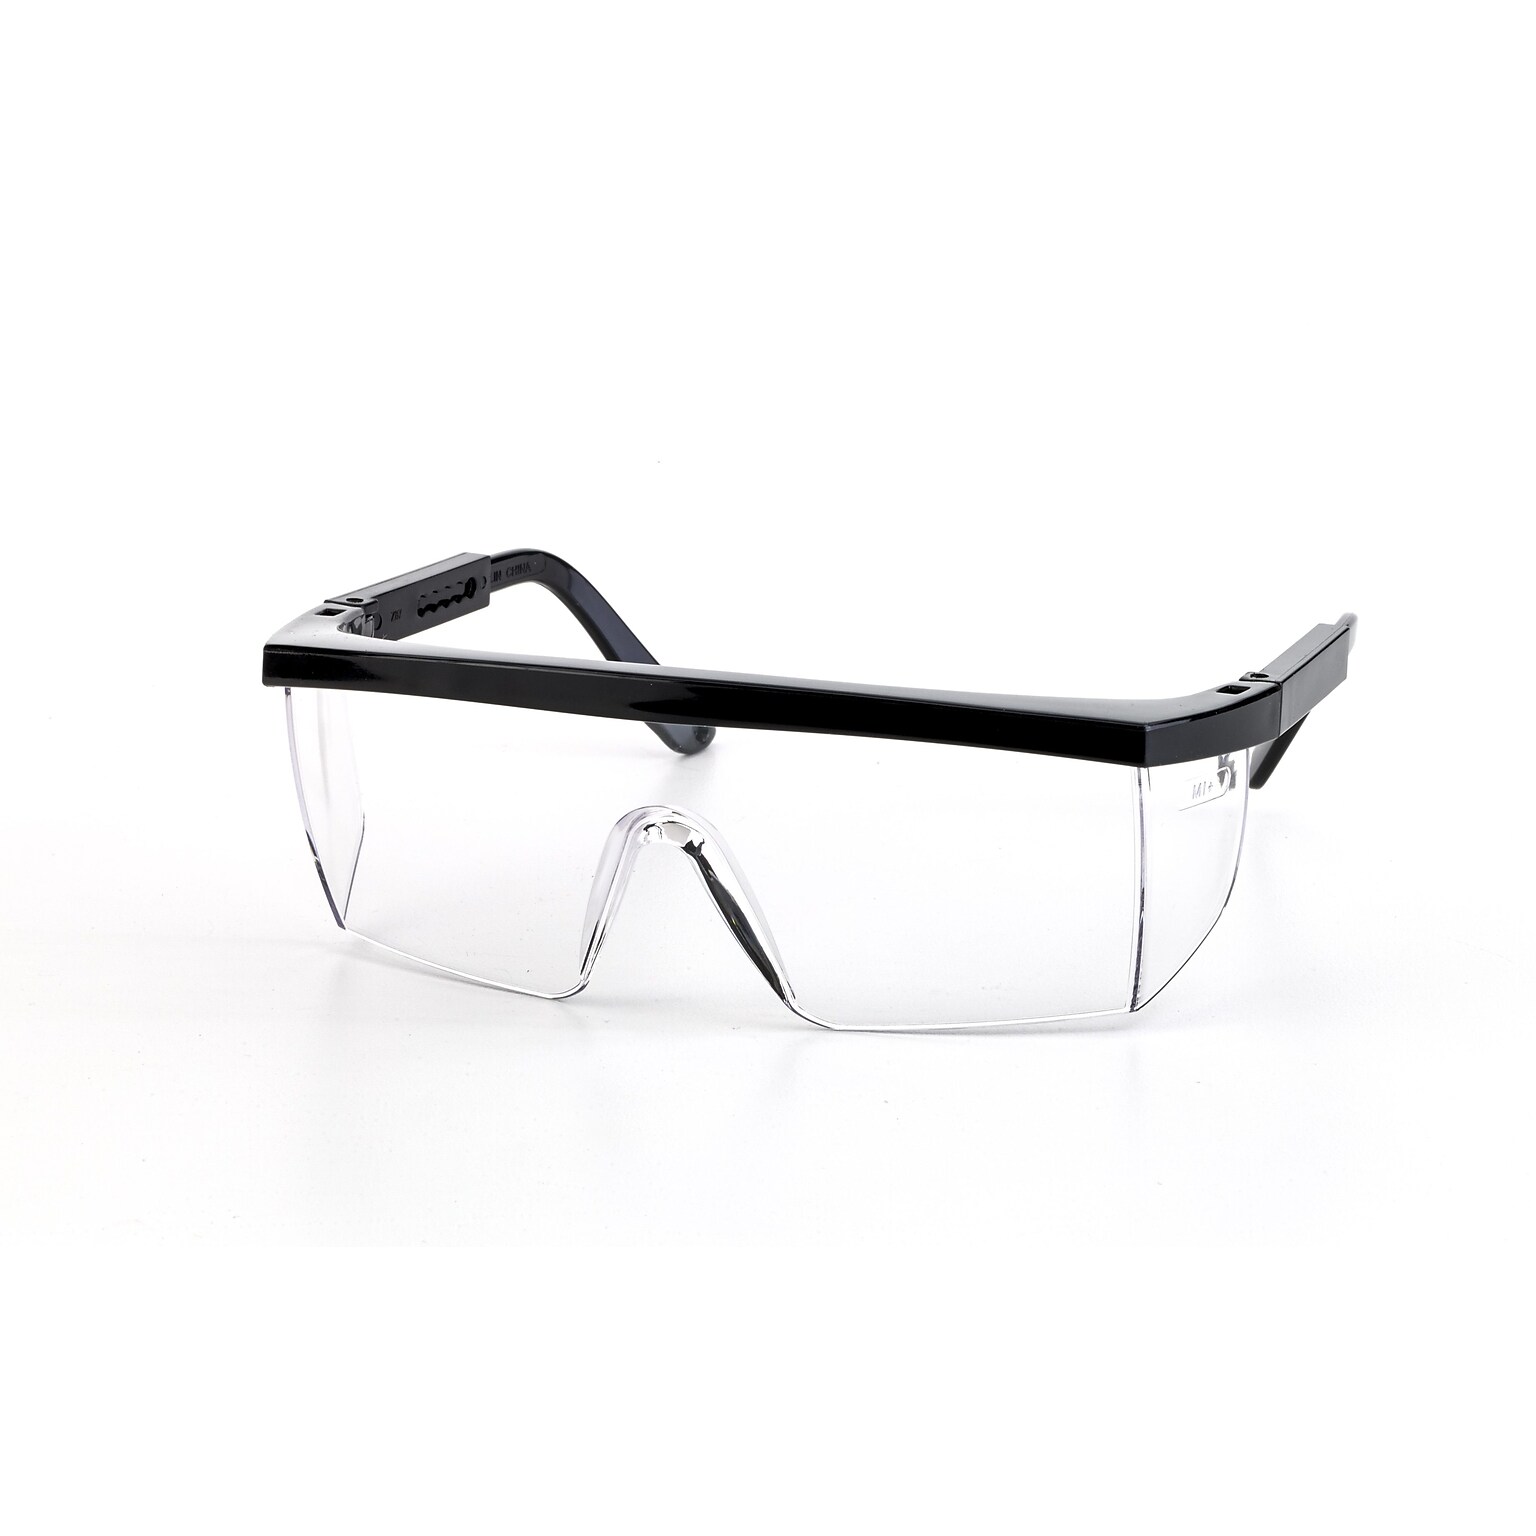 Mutual Industries Marlin Safety Glasses With Black Frame; Clear, 12/Pack